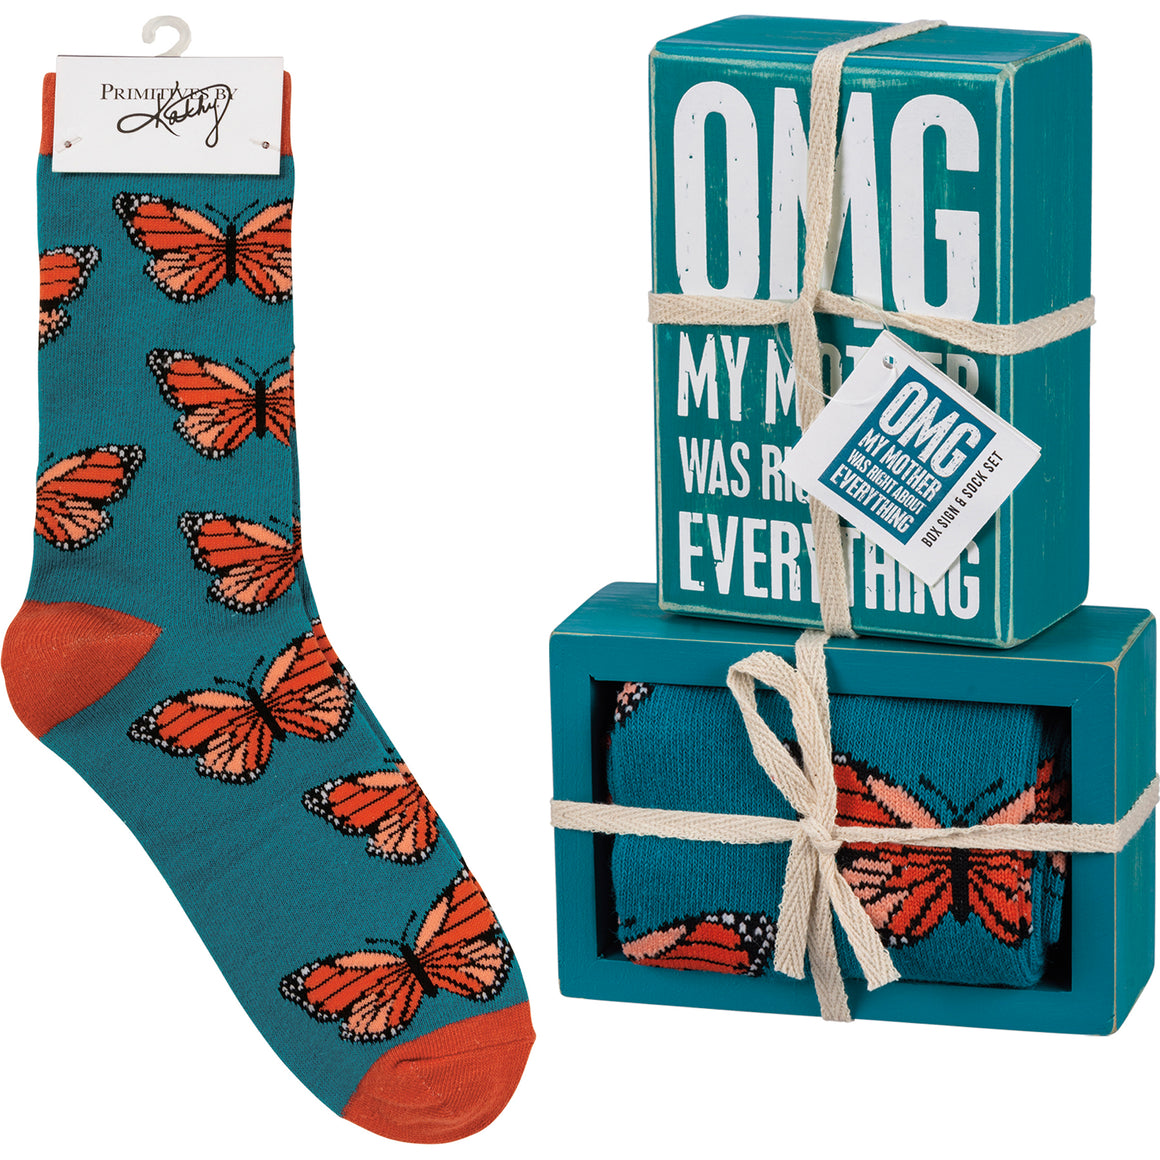 OMG My Mother Was Right Socks & Box Sign Gift Set